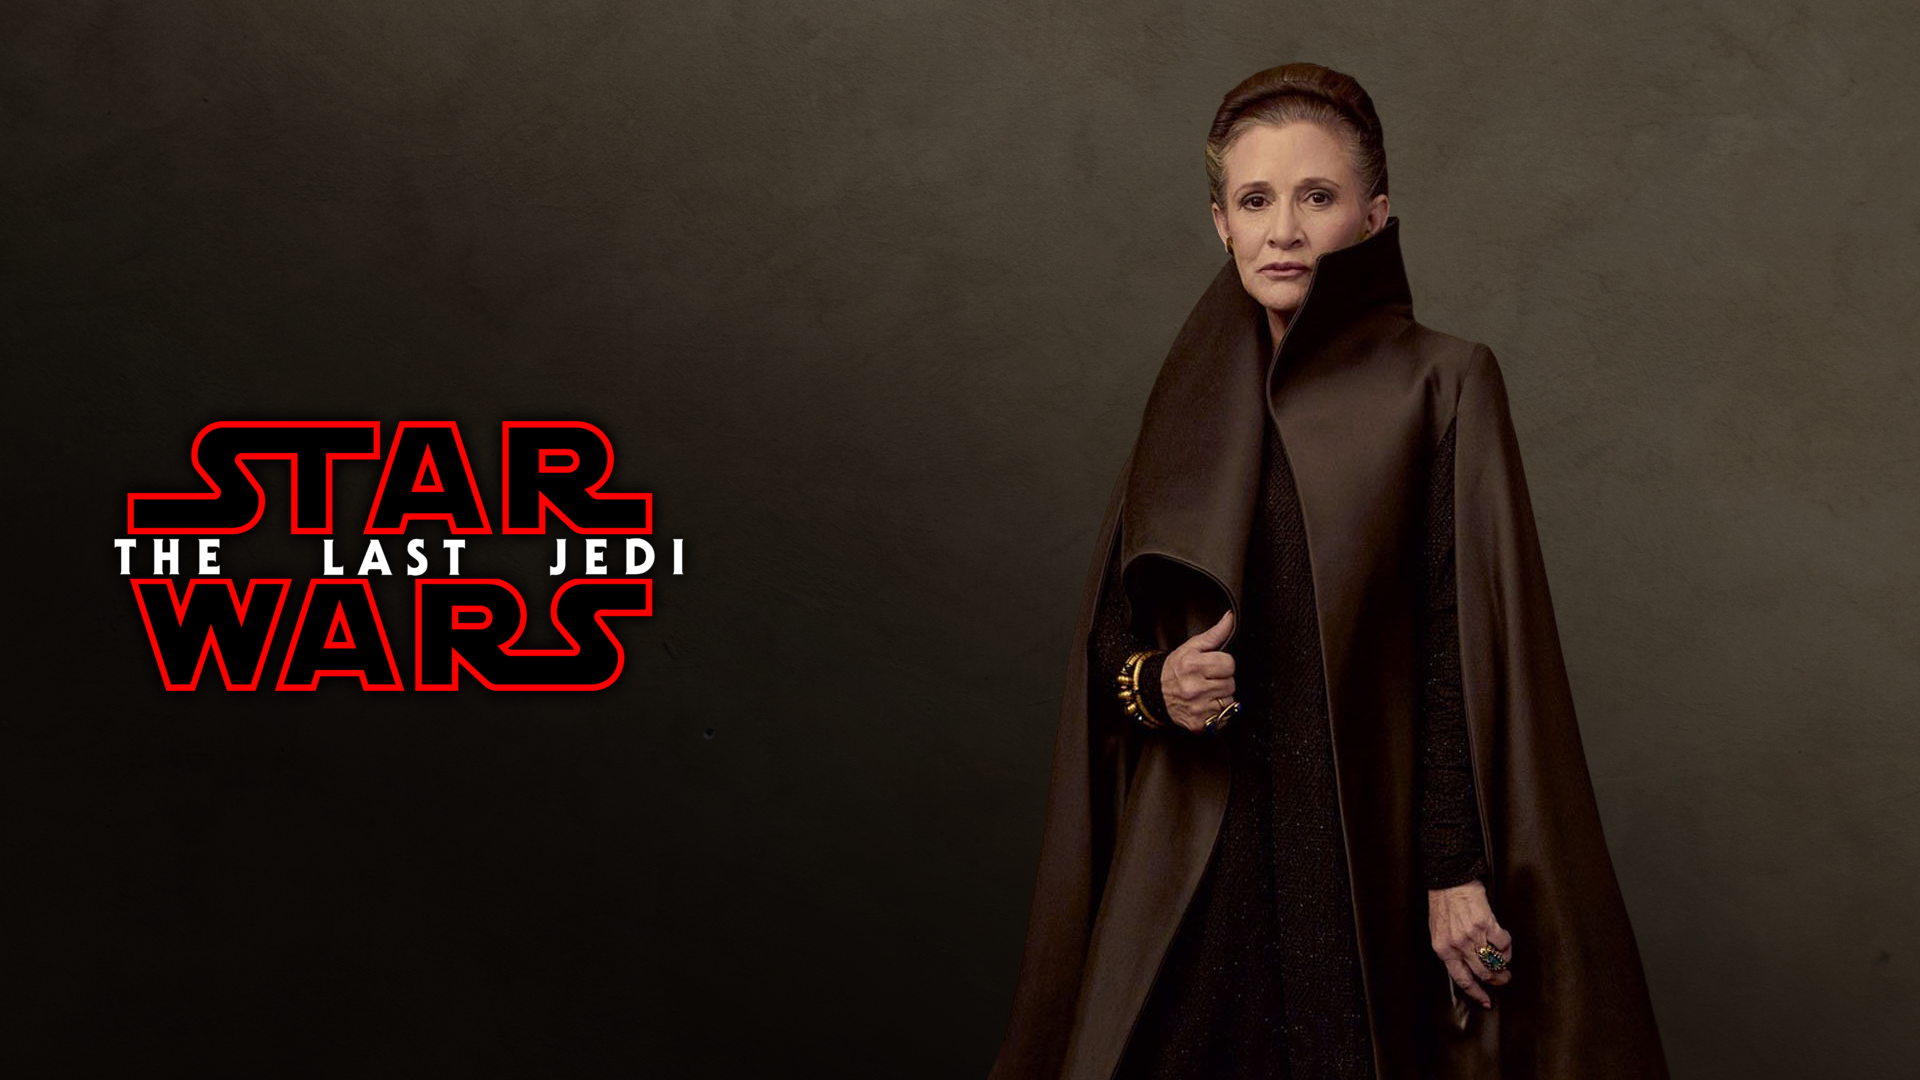 Star Wars The Last Jedi Princess Leia Carrie Fisher Deceased 1920x1080